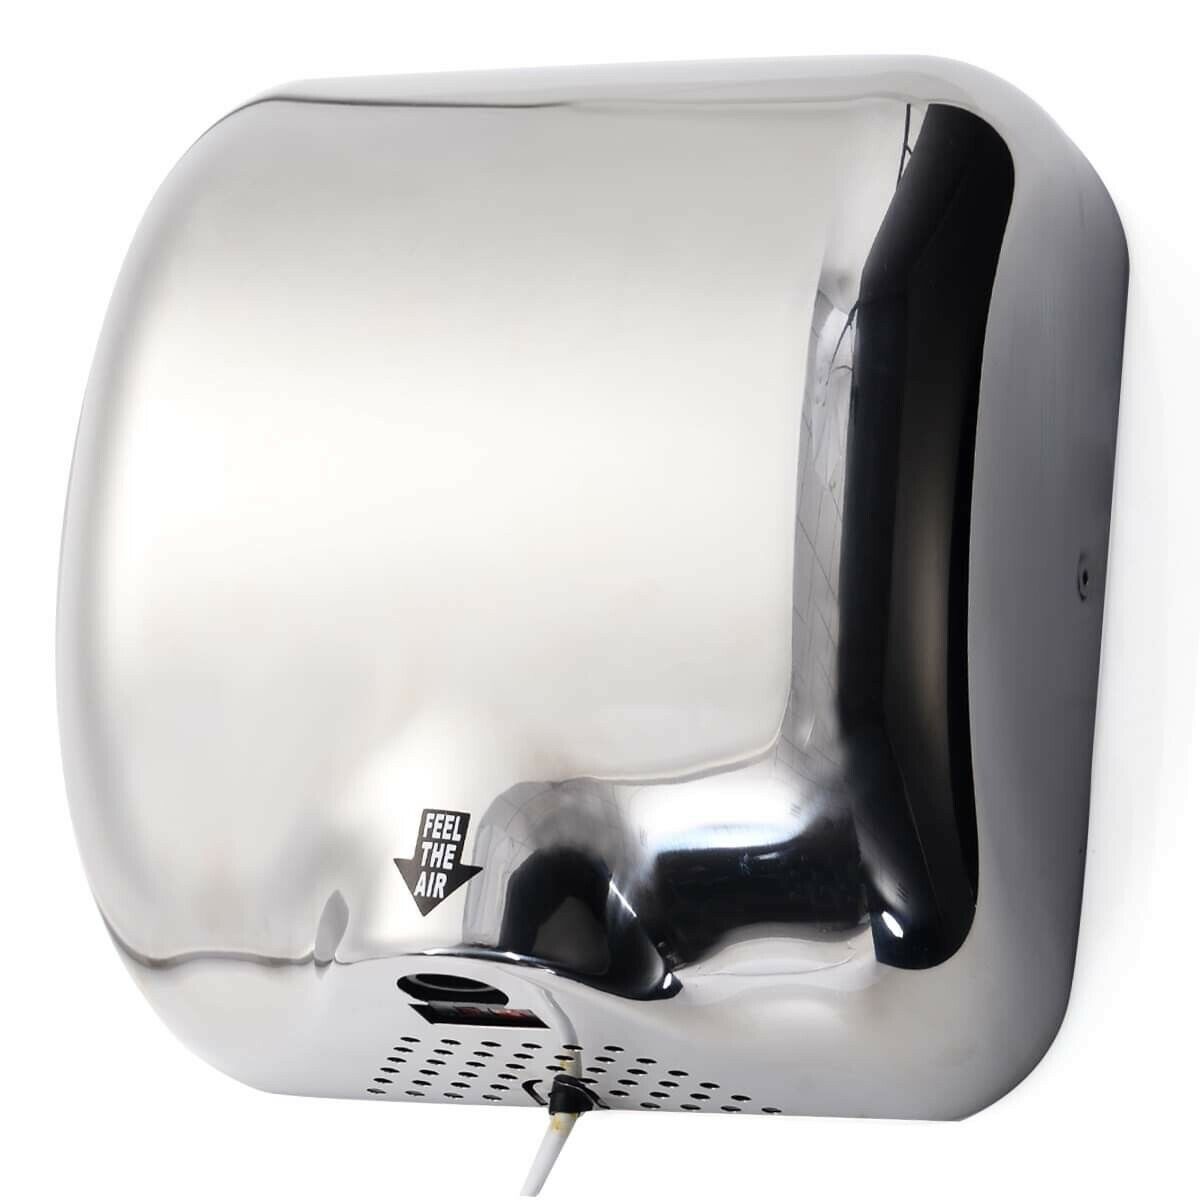 Brand New Commercial automatic Hand Dryer - enegery efficient - chrome  